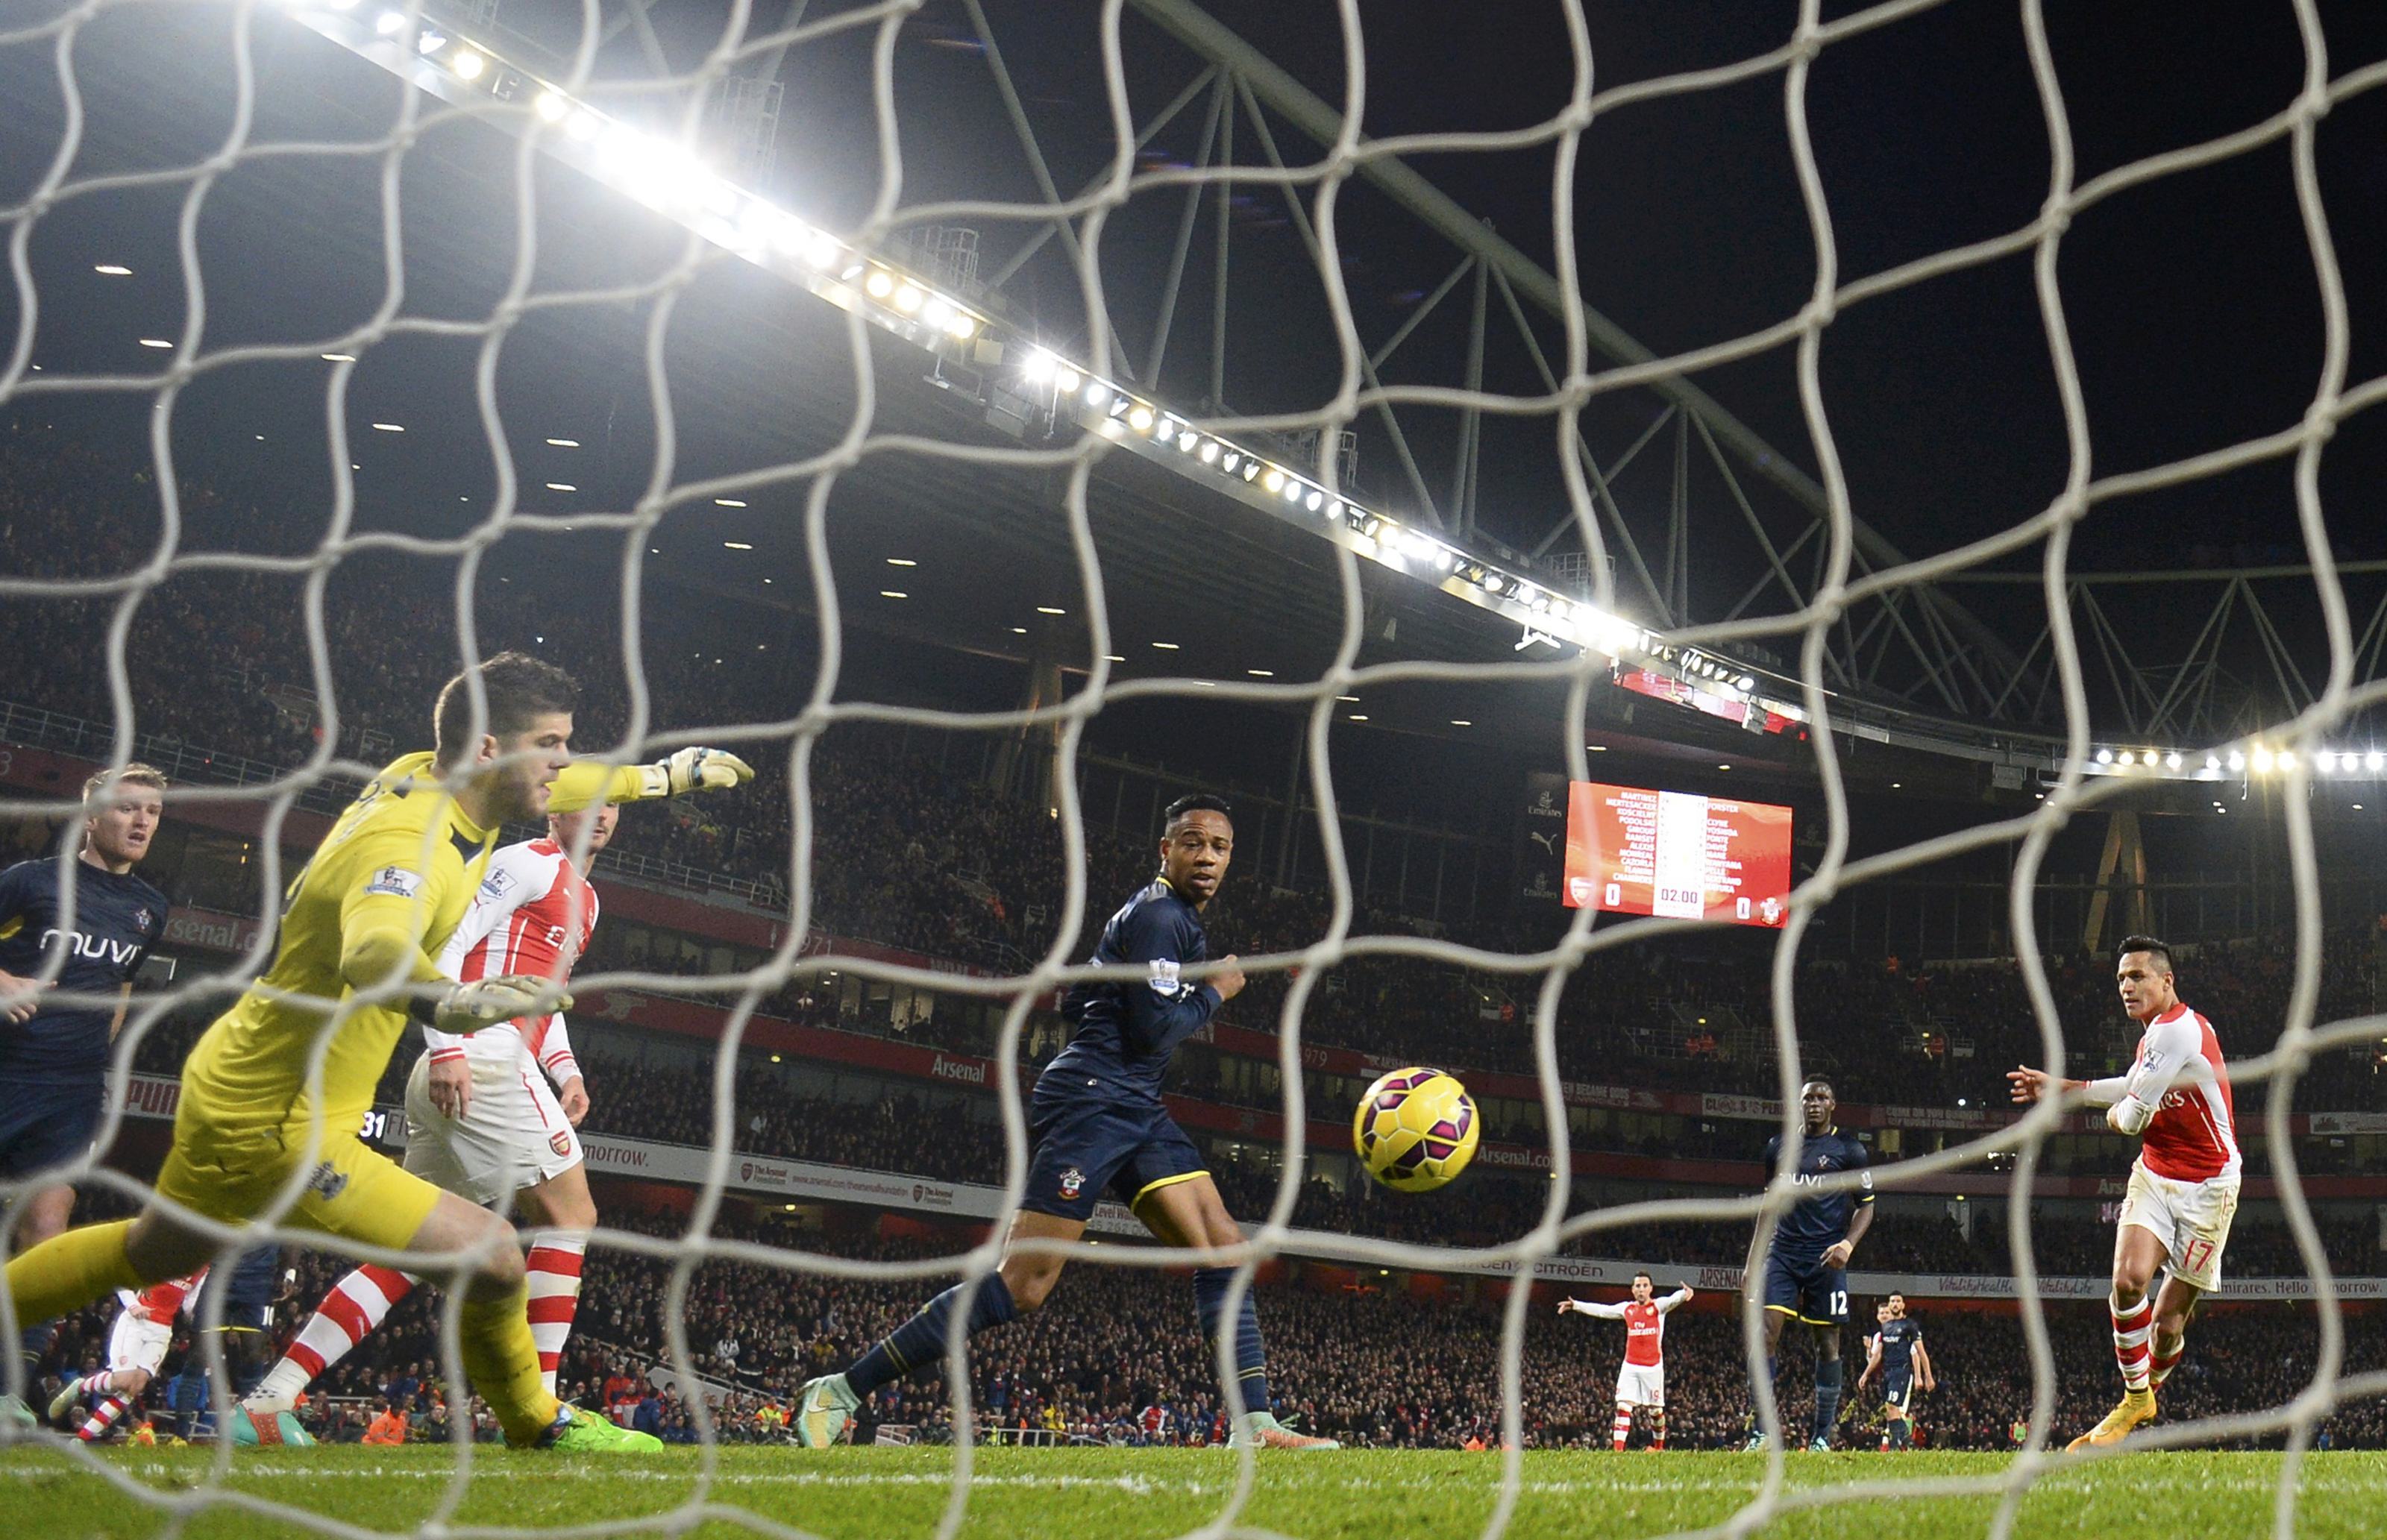 Arsenal's Sanchez scores against Southampton during their English Premier League soccer match at the Emirates Stadium in London